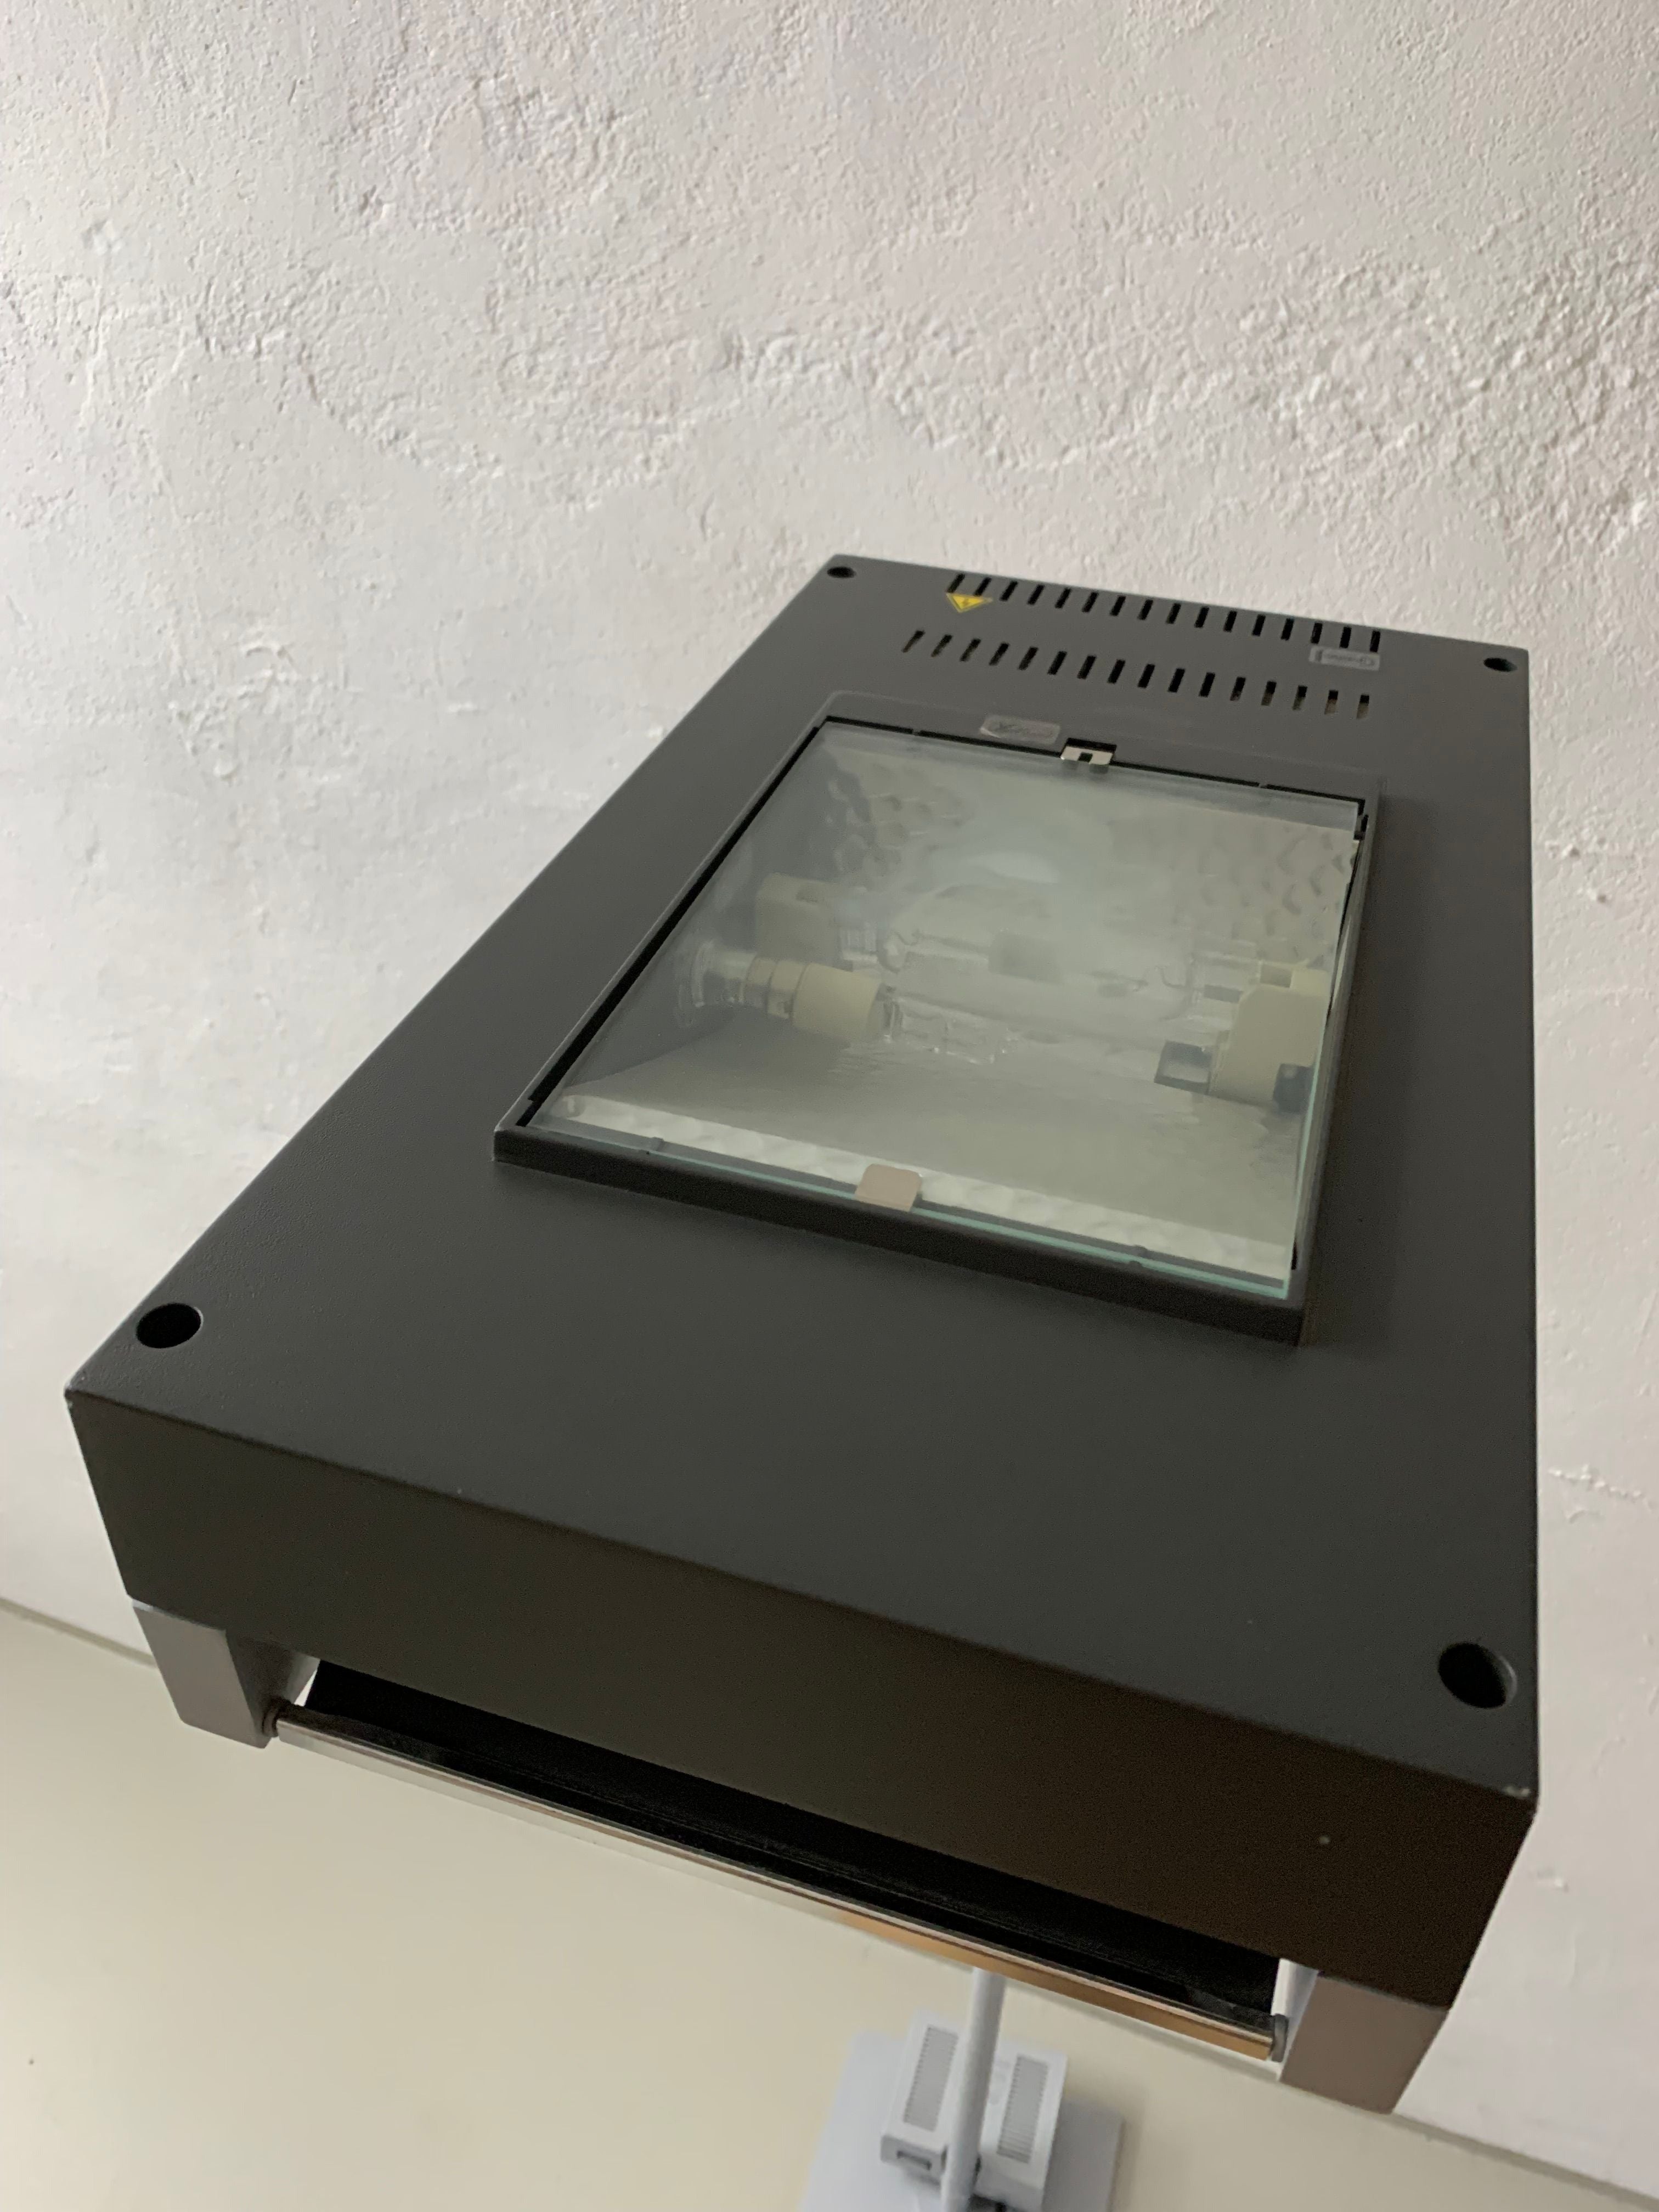 A black slide projector featuring a Veter Vintage Postmodern Metal Lamp by Glen Oliver Löw and Antonio Citterio for Ansorg | 1990s office system, positioned against a white textured wall, showing a focused image of a car within its display screen.